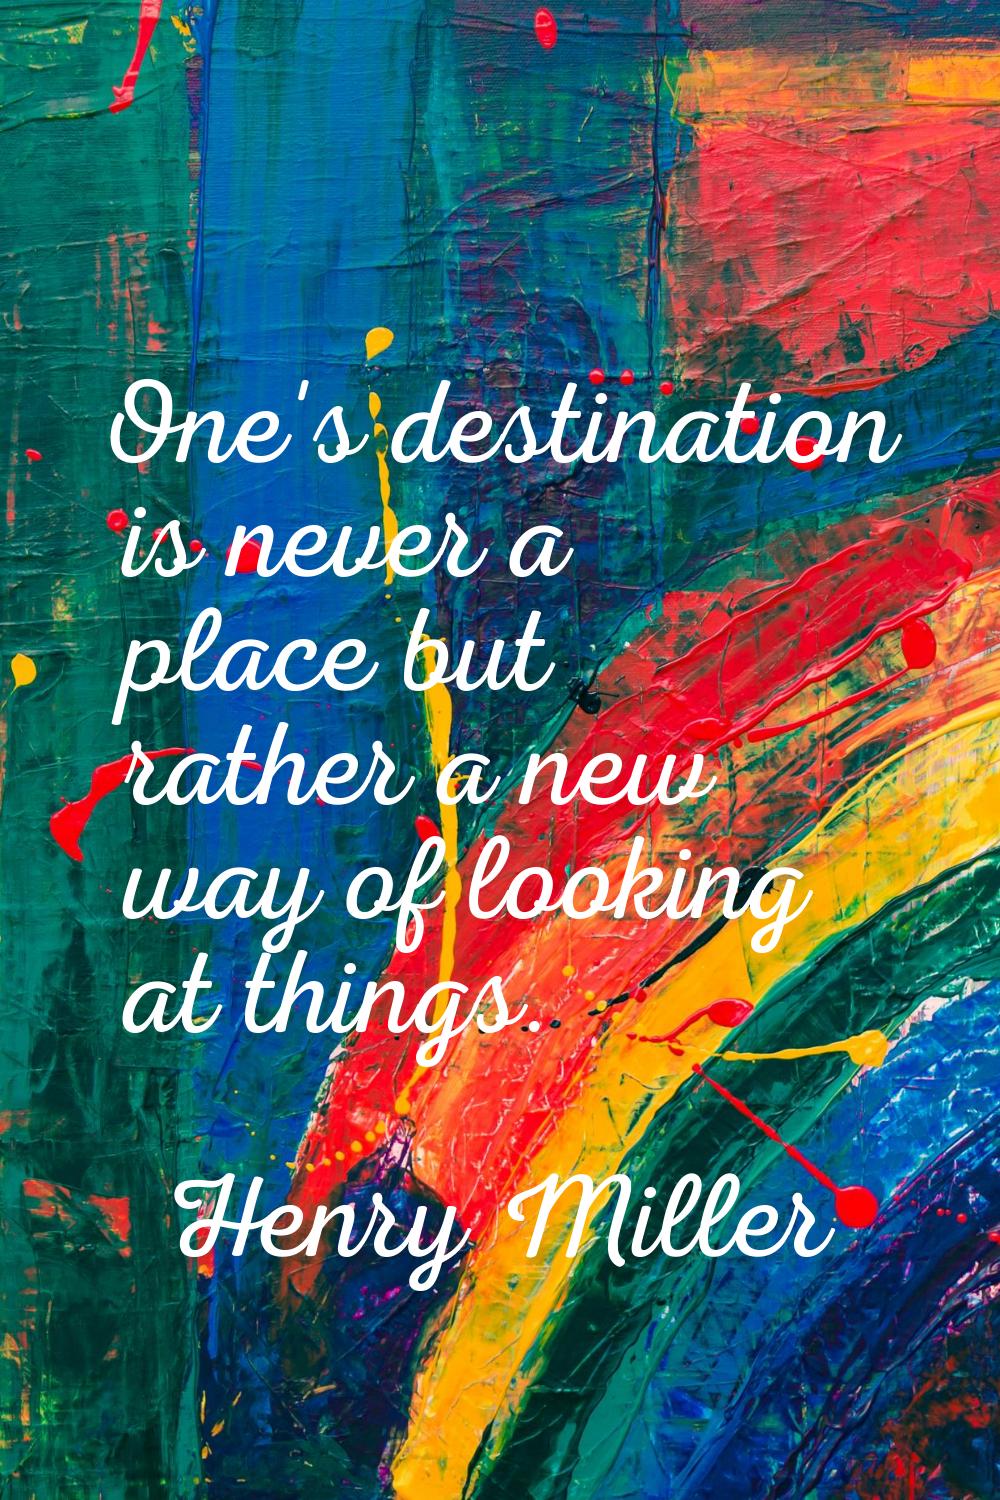 One's destination is never a place but rather a new way of looking at things.